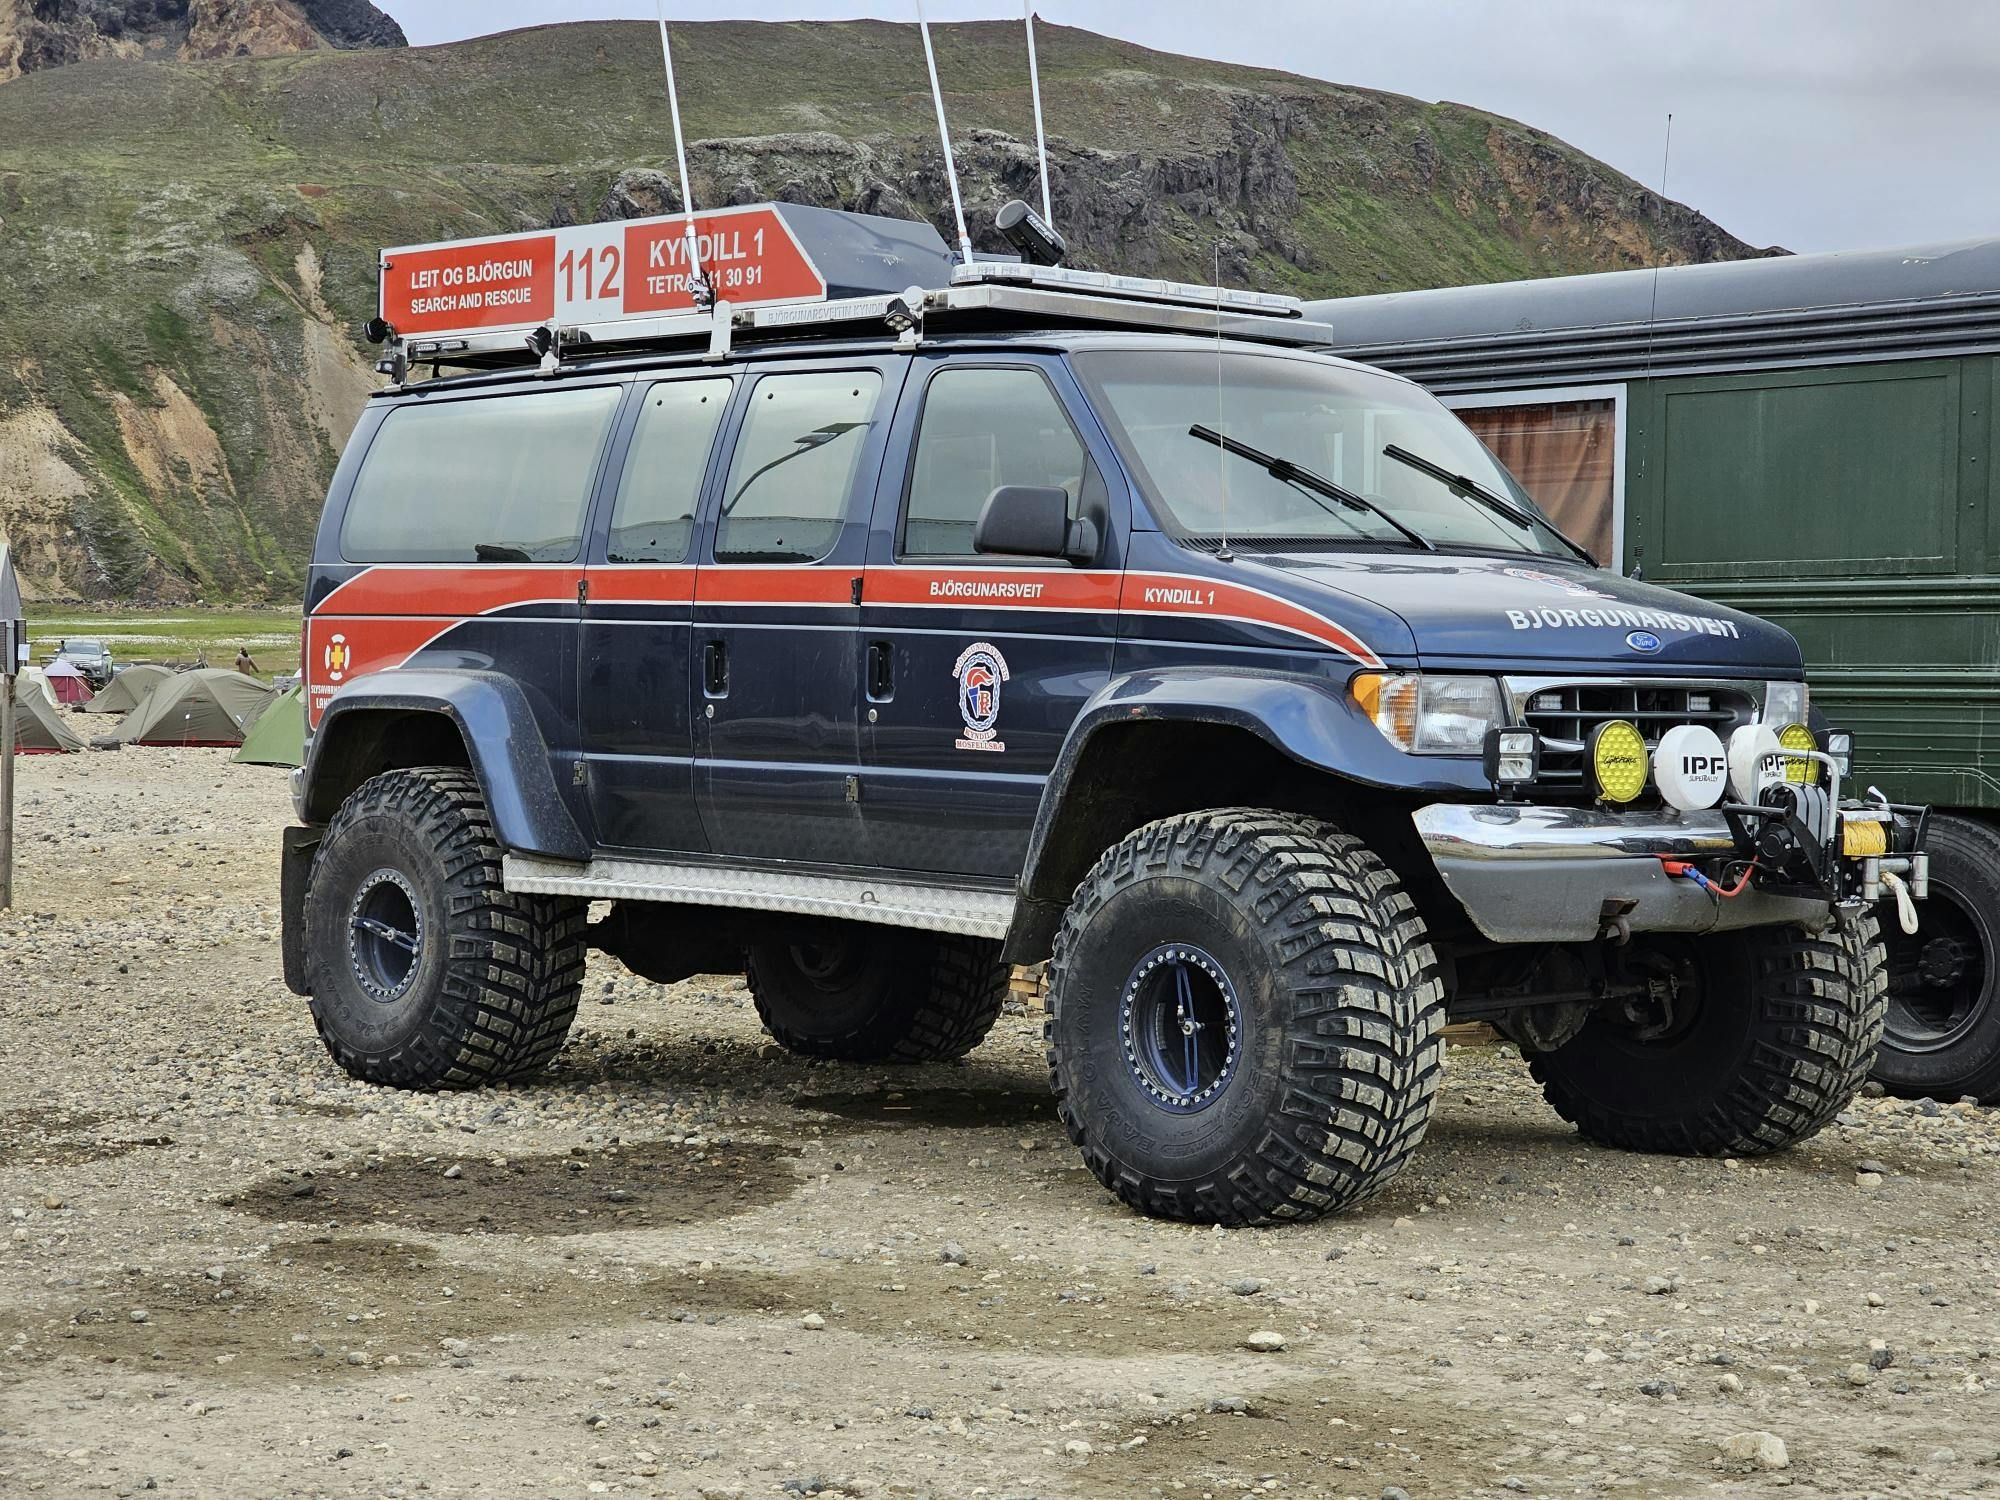 Iceland Search and Rescue ford van overlander